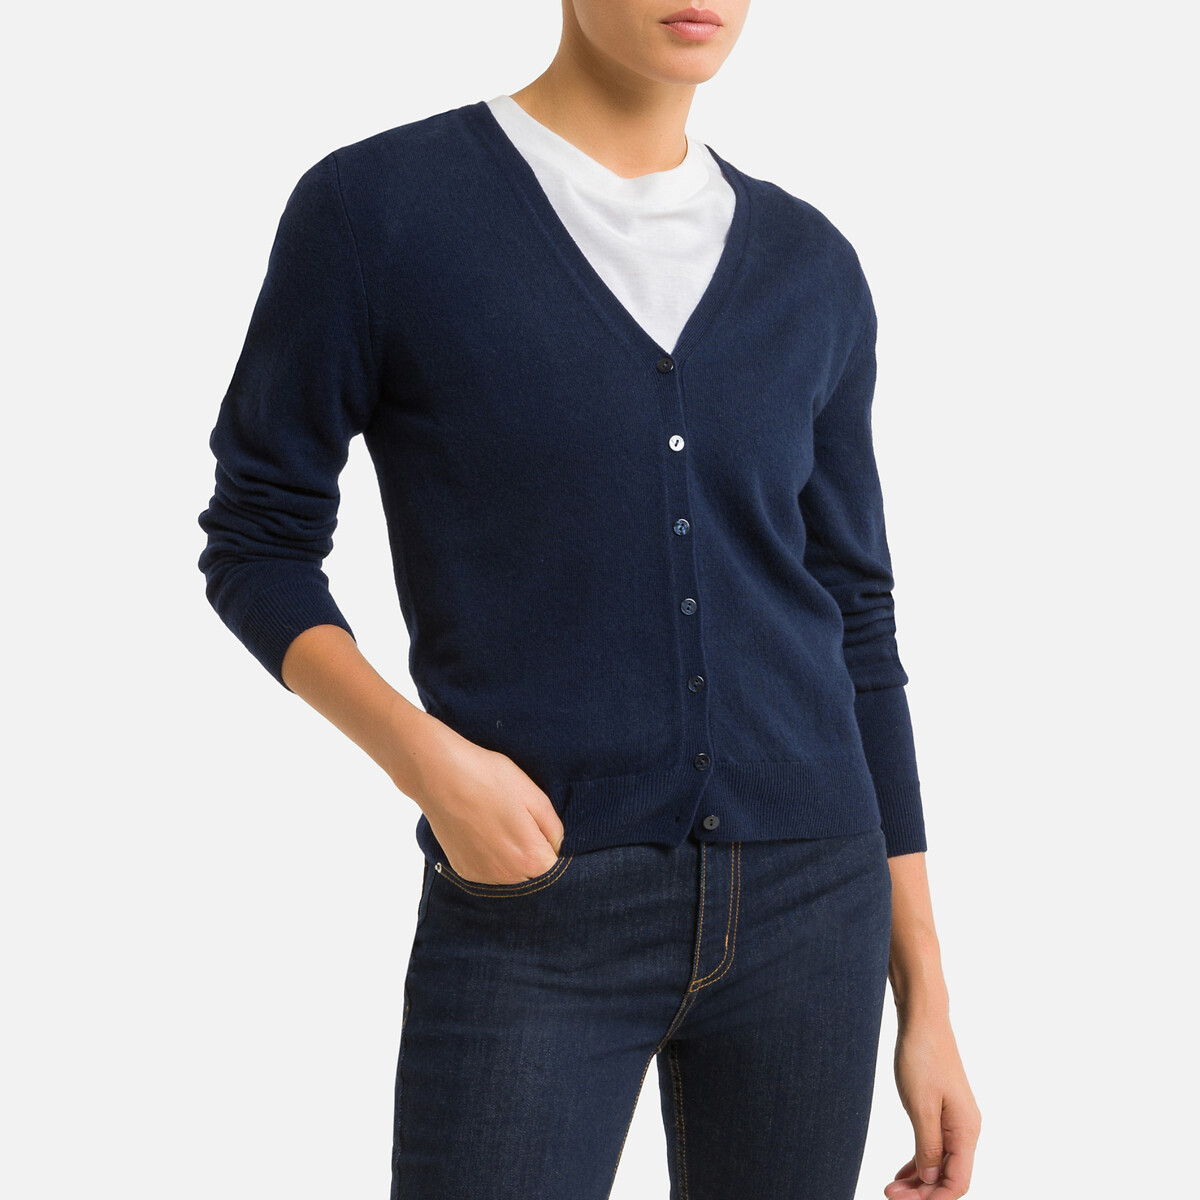 Wool with v-neck Benetton La Redoute